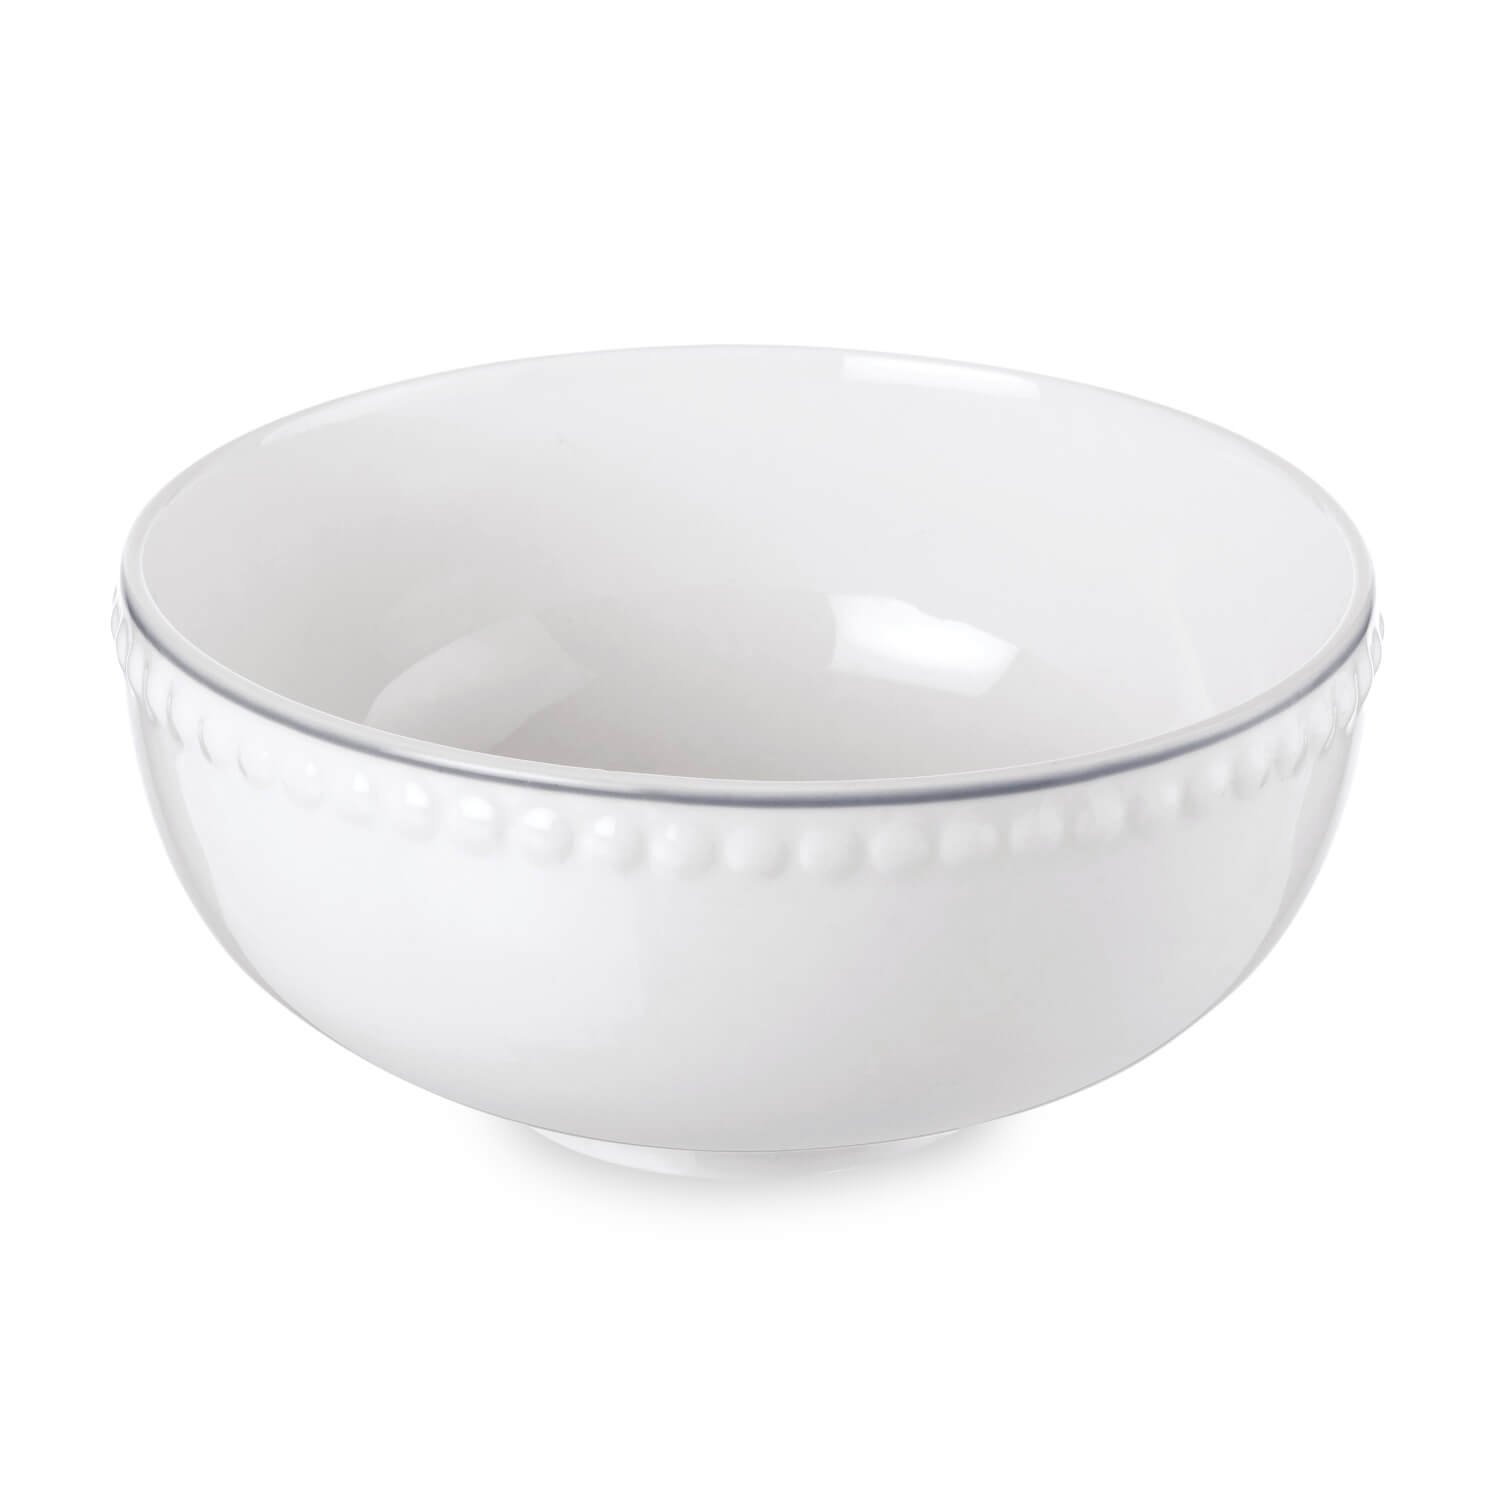 SIGNATURE COLLECTION CEREAL BOWL 13cm